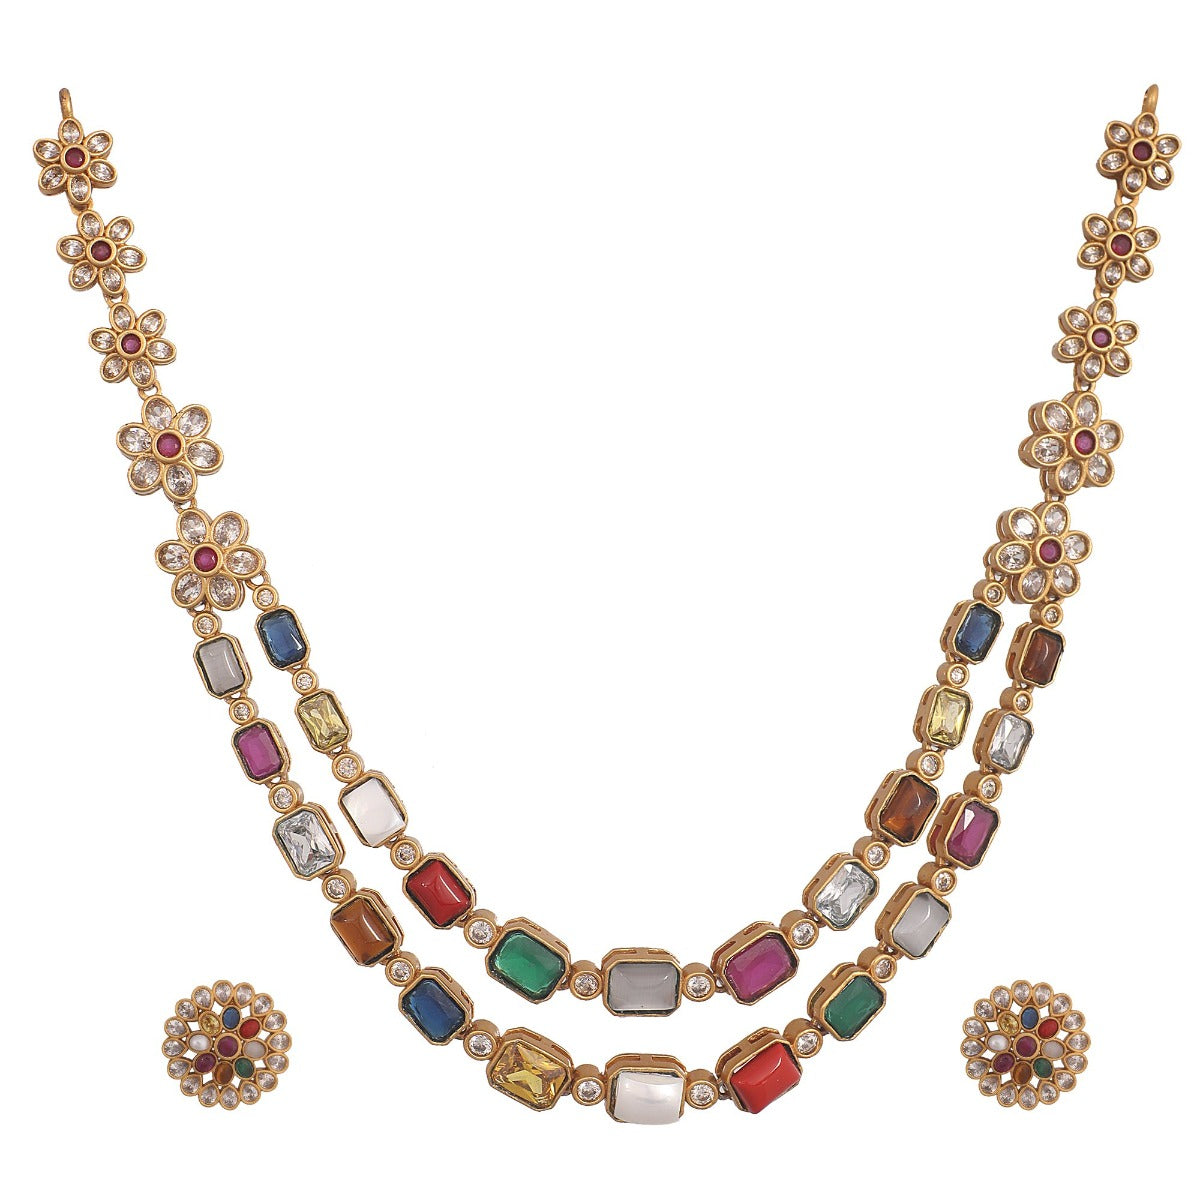 Dazzling Indian Jewellery: Multicolored gemstone necklace and earrings set.